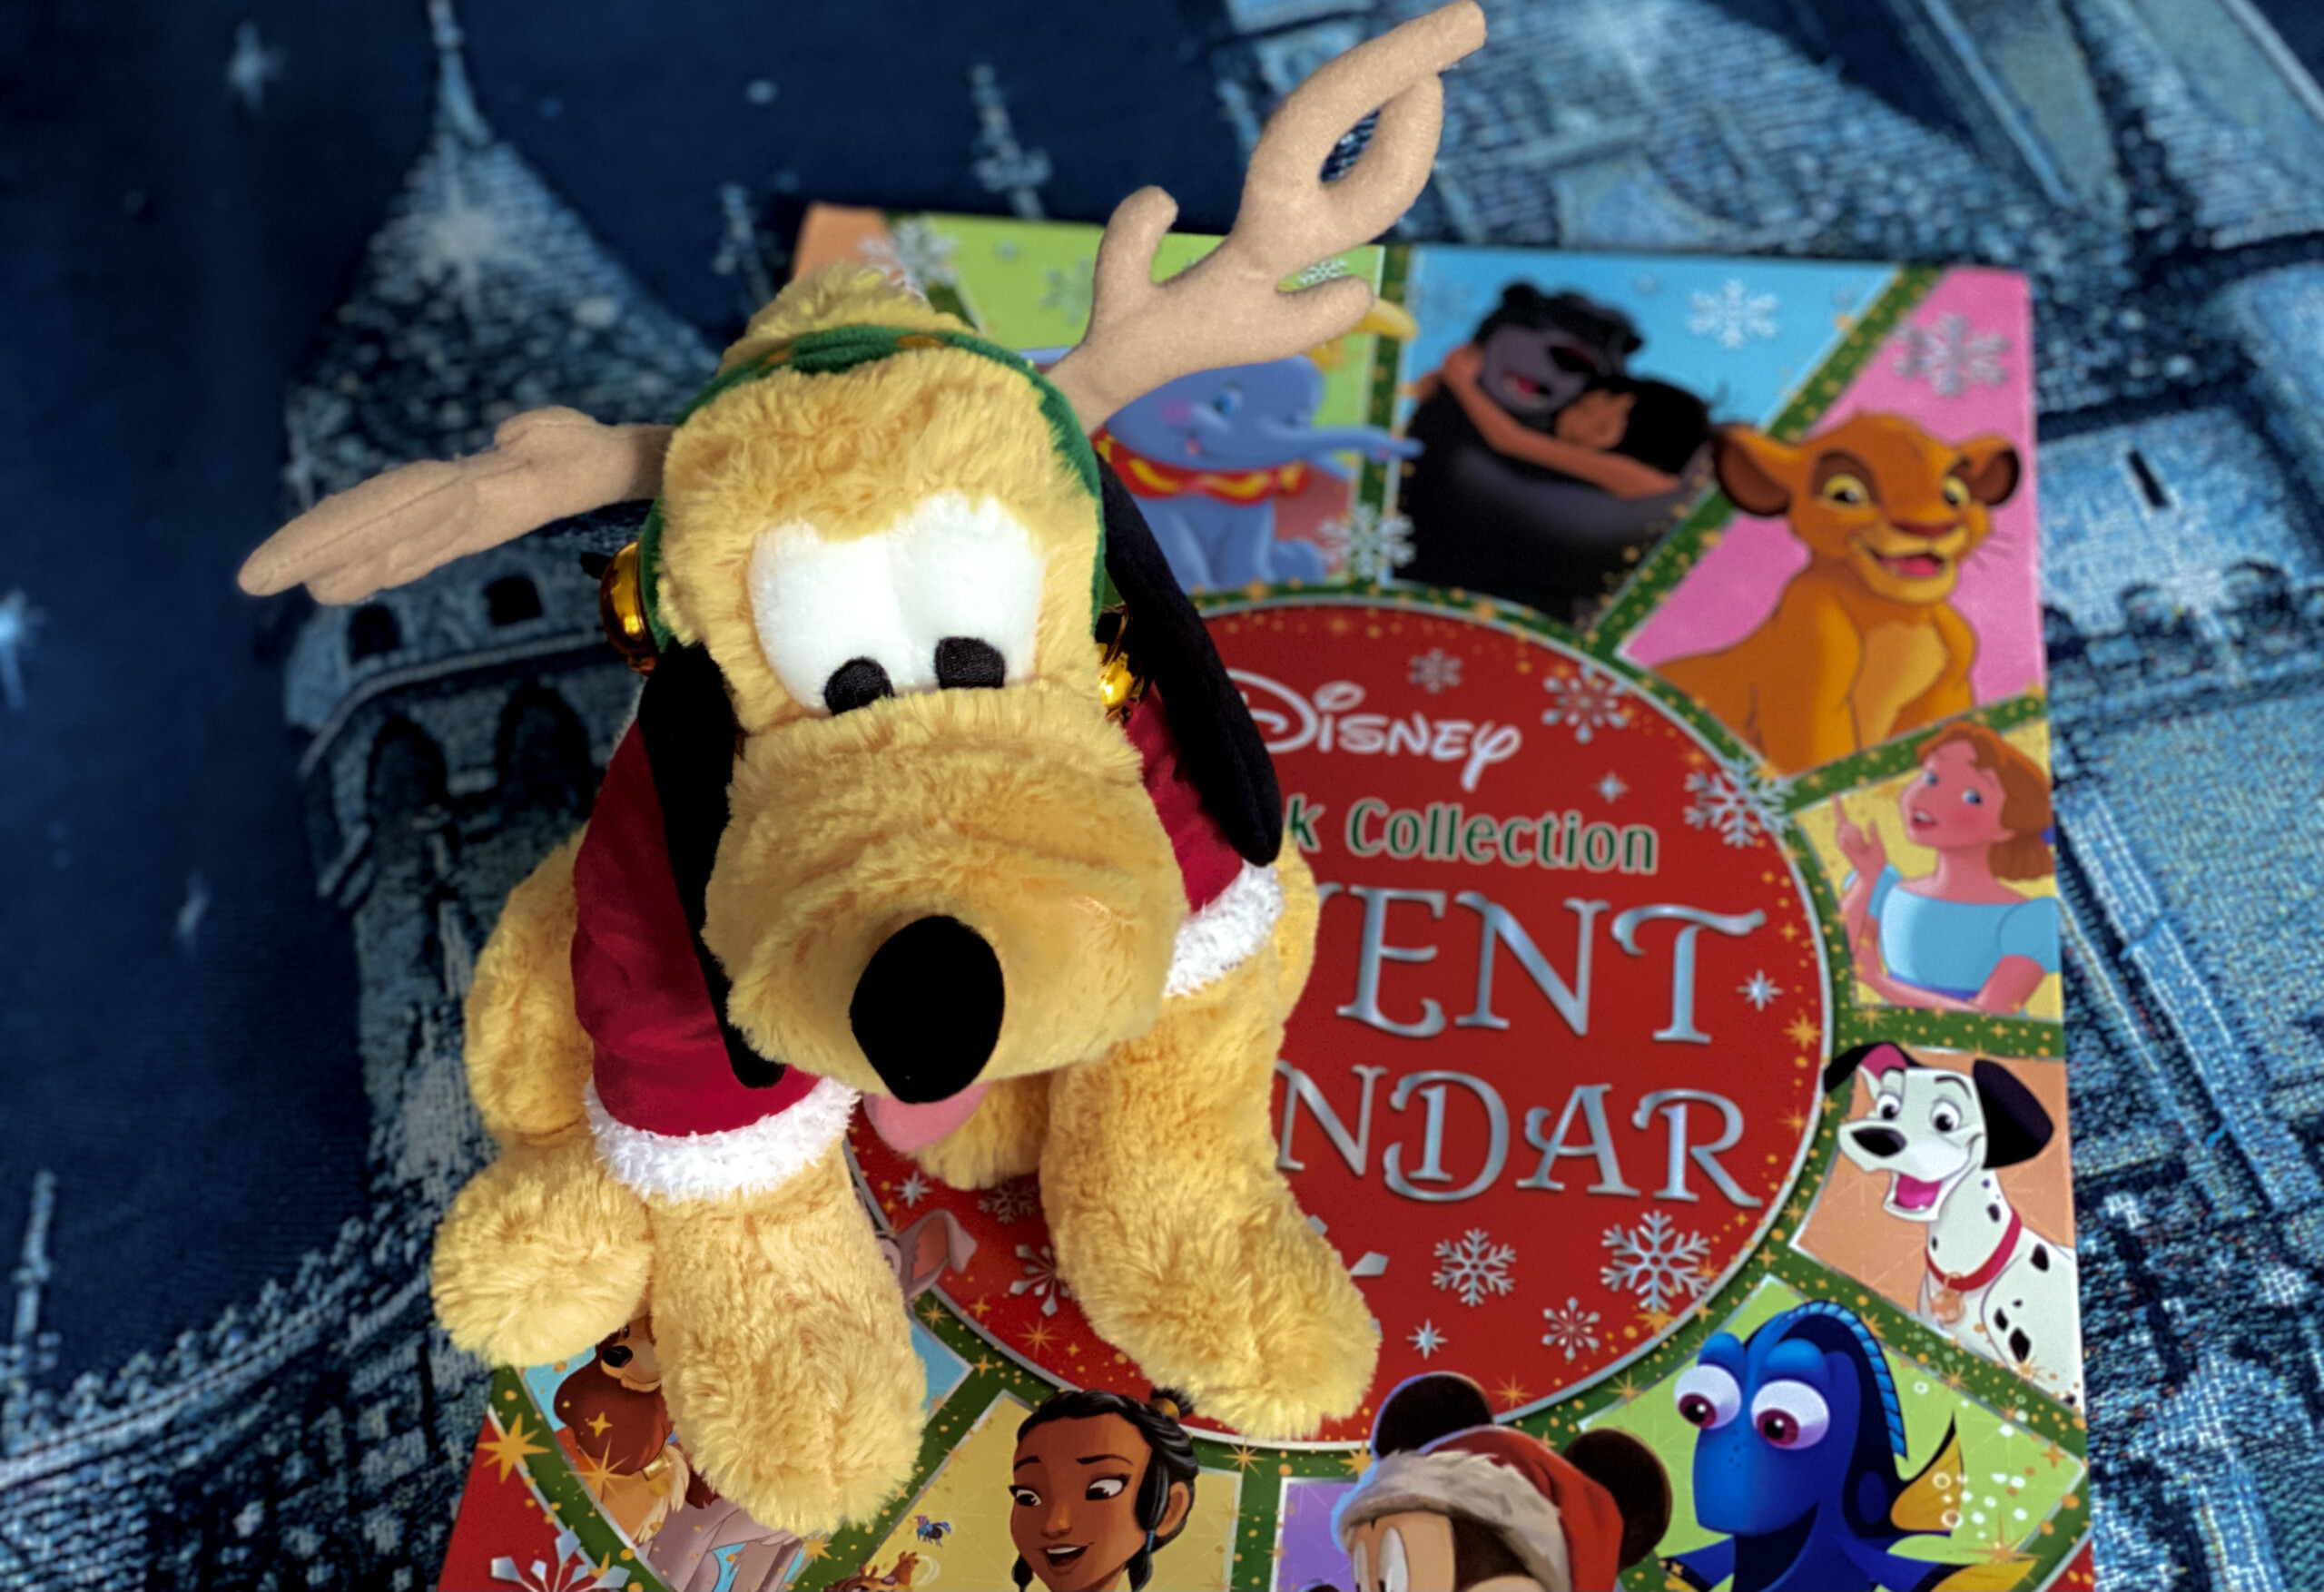 A Magical Review of Disney's Storybook Collection Advent Calendar